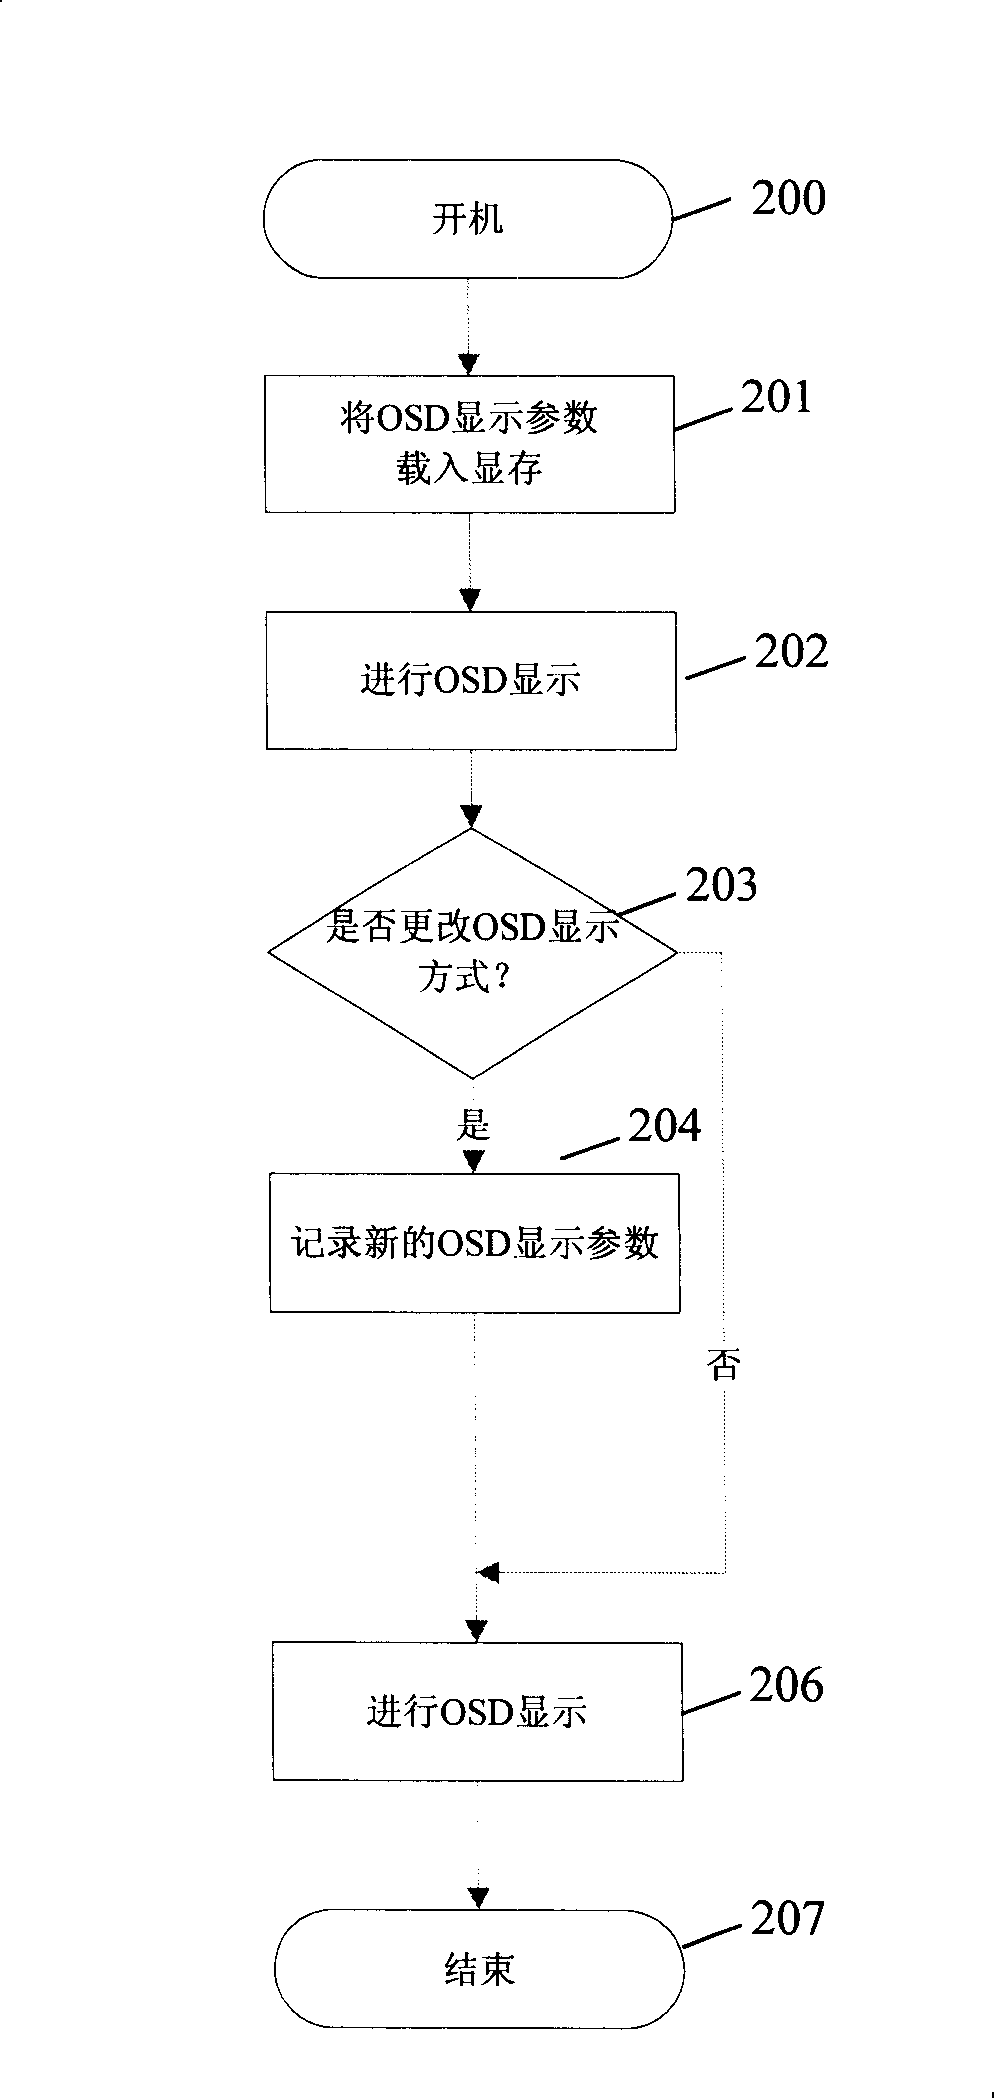 Method and device for controlling TV set menu interface